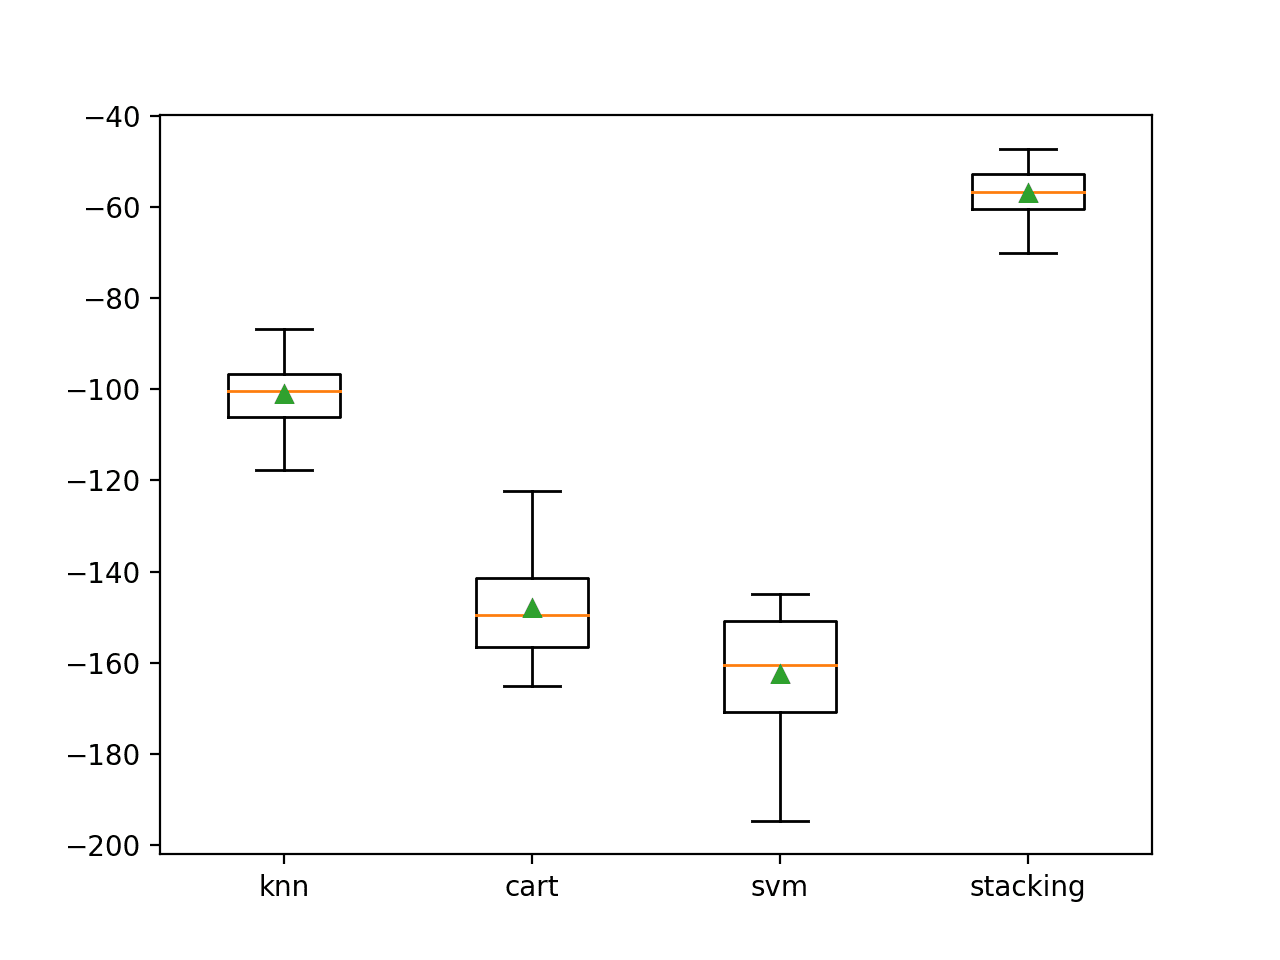 Box Plot of Standalone and Stacking Model Negative Mean Absolute Error for Regression